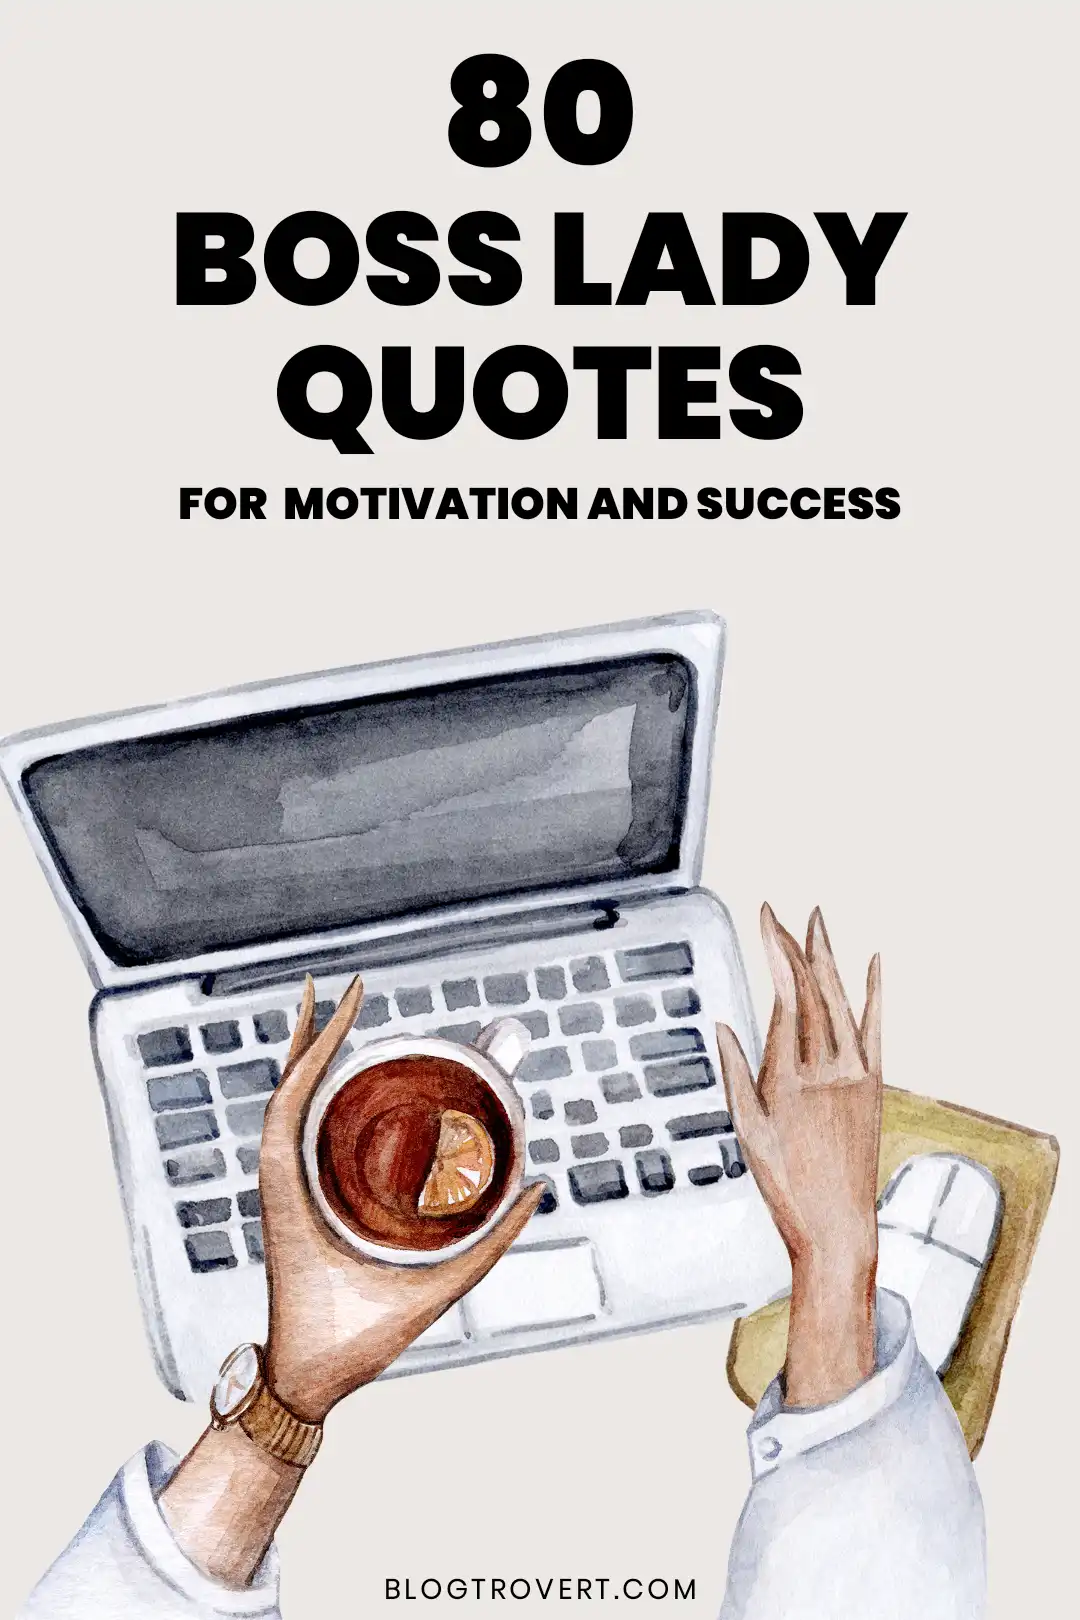 106 boss lady quotes for motivation, success and more 5